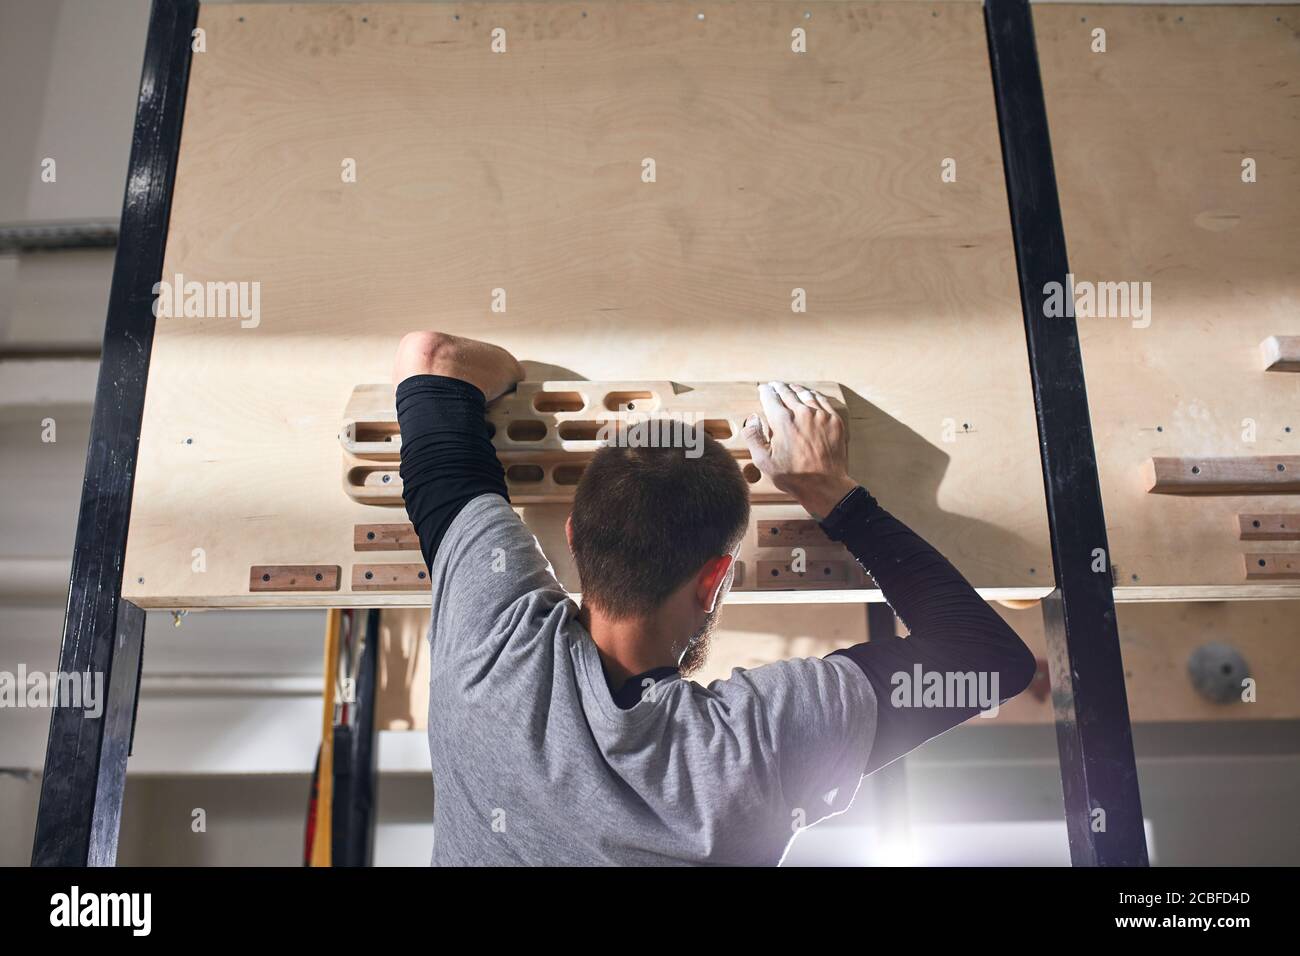 Close up view of young rock climber without forearm hanging on special wooden panel for working out firm grip, training in indoors climbing settings. Stock Photo